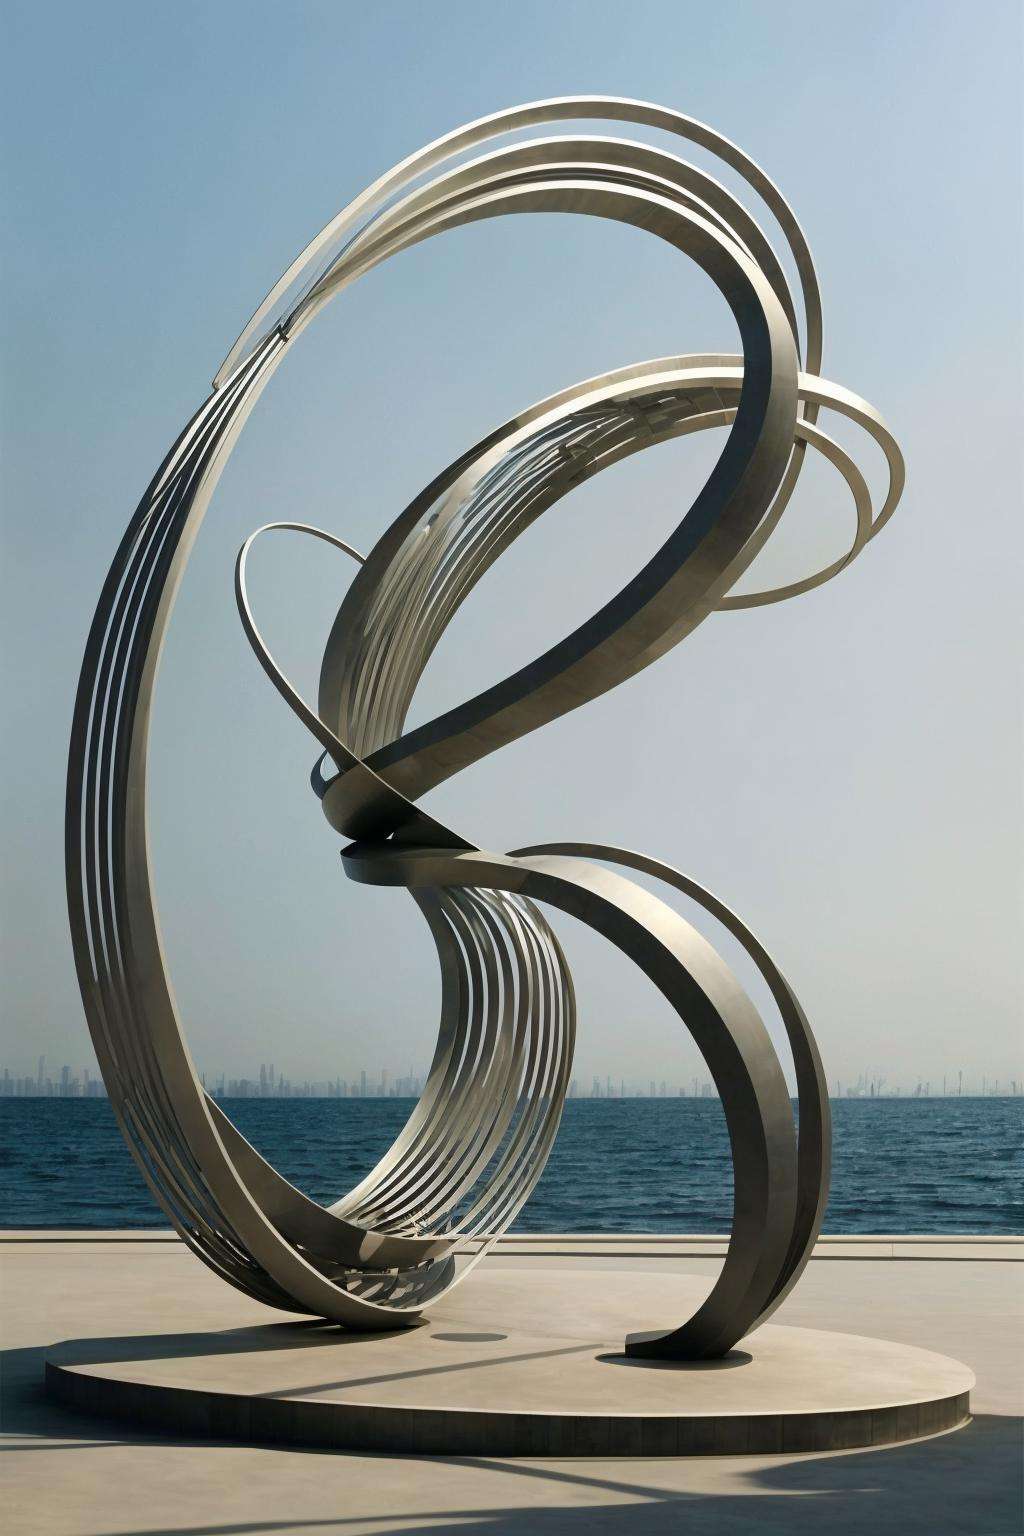 Sculpture: A kinetic metal structure, twisting and turning with the wind, evoking a sense of perpetual motion and change. ,  con_art2